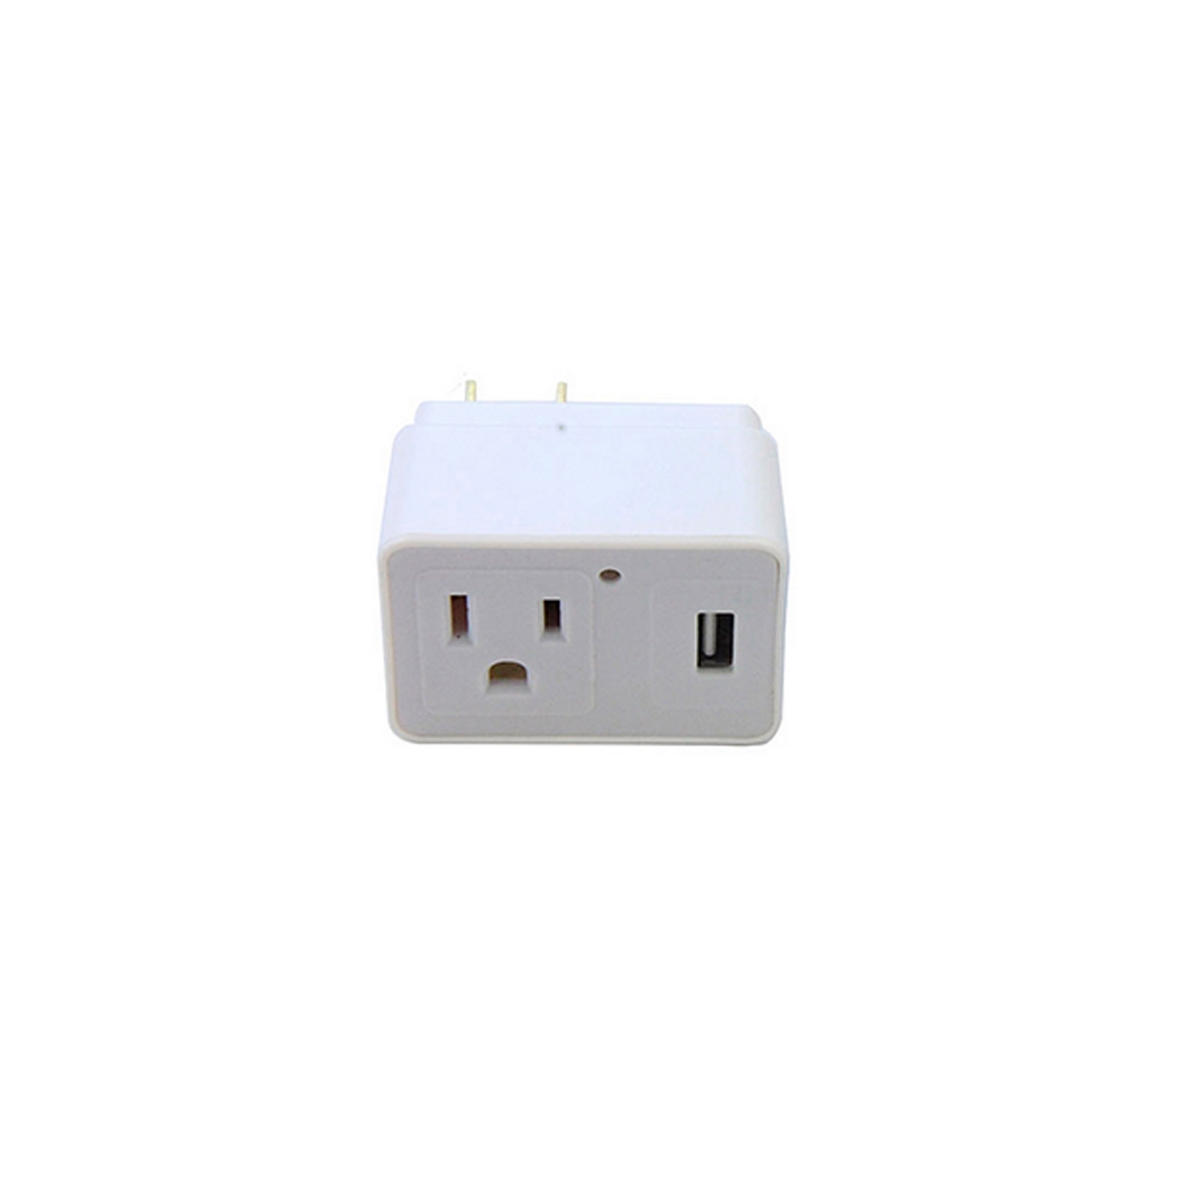 AC Power Adapter with USB Charger